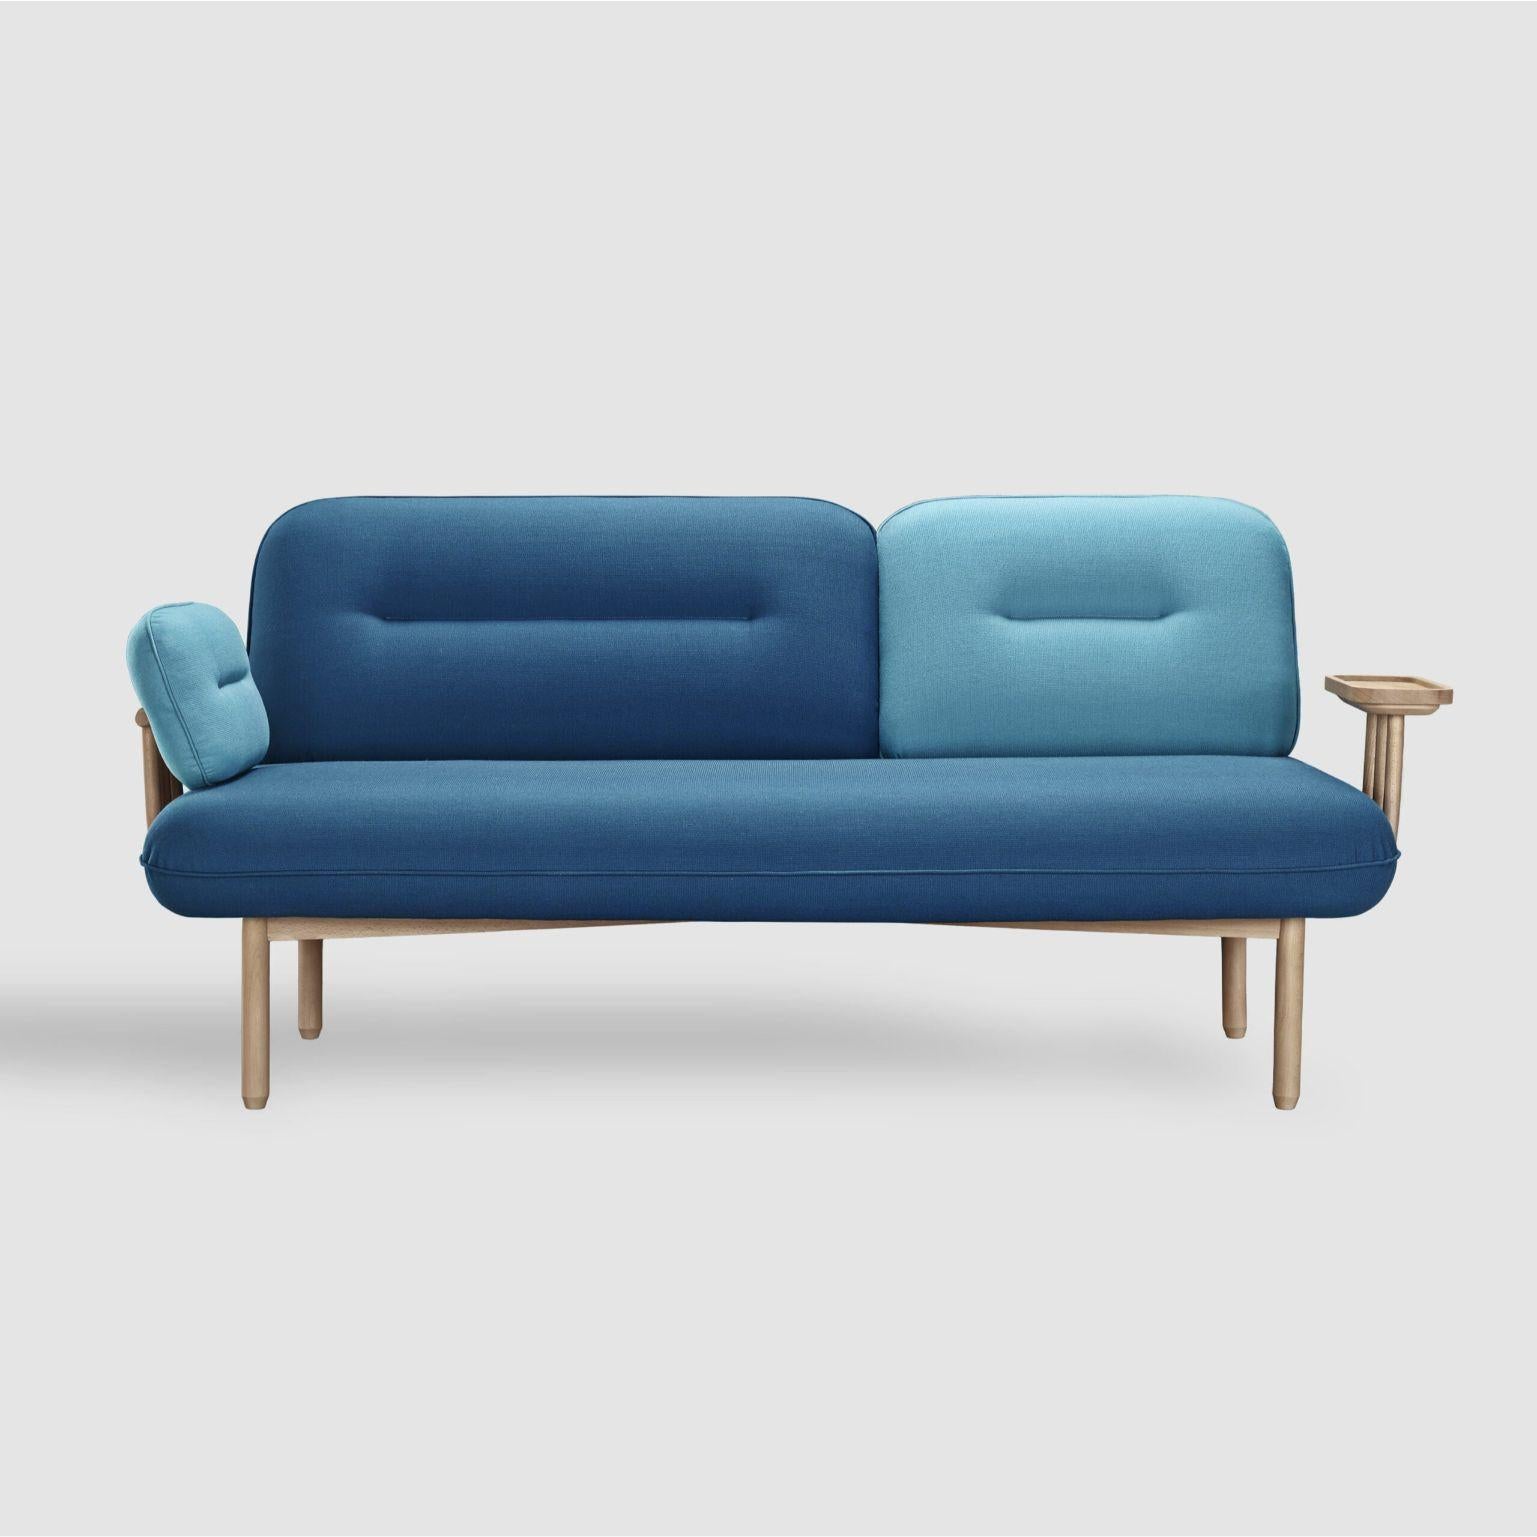 Blue Cosmo Sofa by Pepe Albargues
Dimensions: W195, D85, H85, Seat45
Materials: Pine and beech wood structure reinforced with plywood
Arms and backrest frame treated with the steam bending technique
Foam CMHR (high resilience and flame retardant)